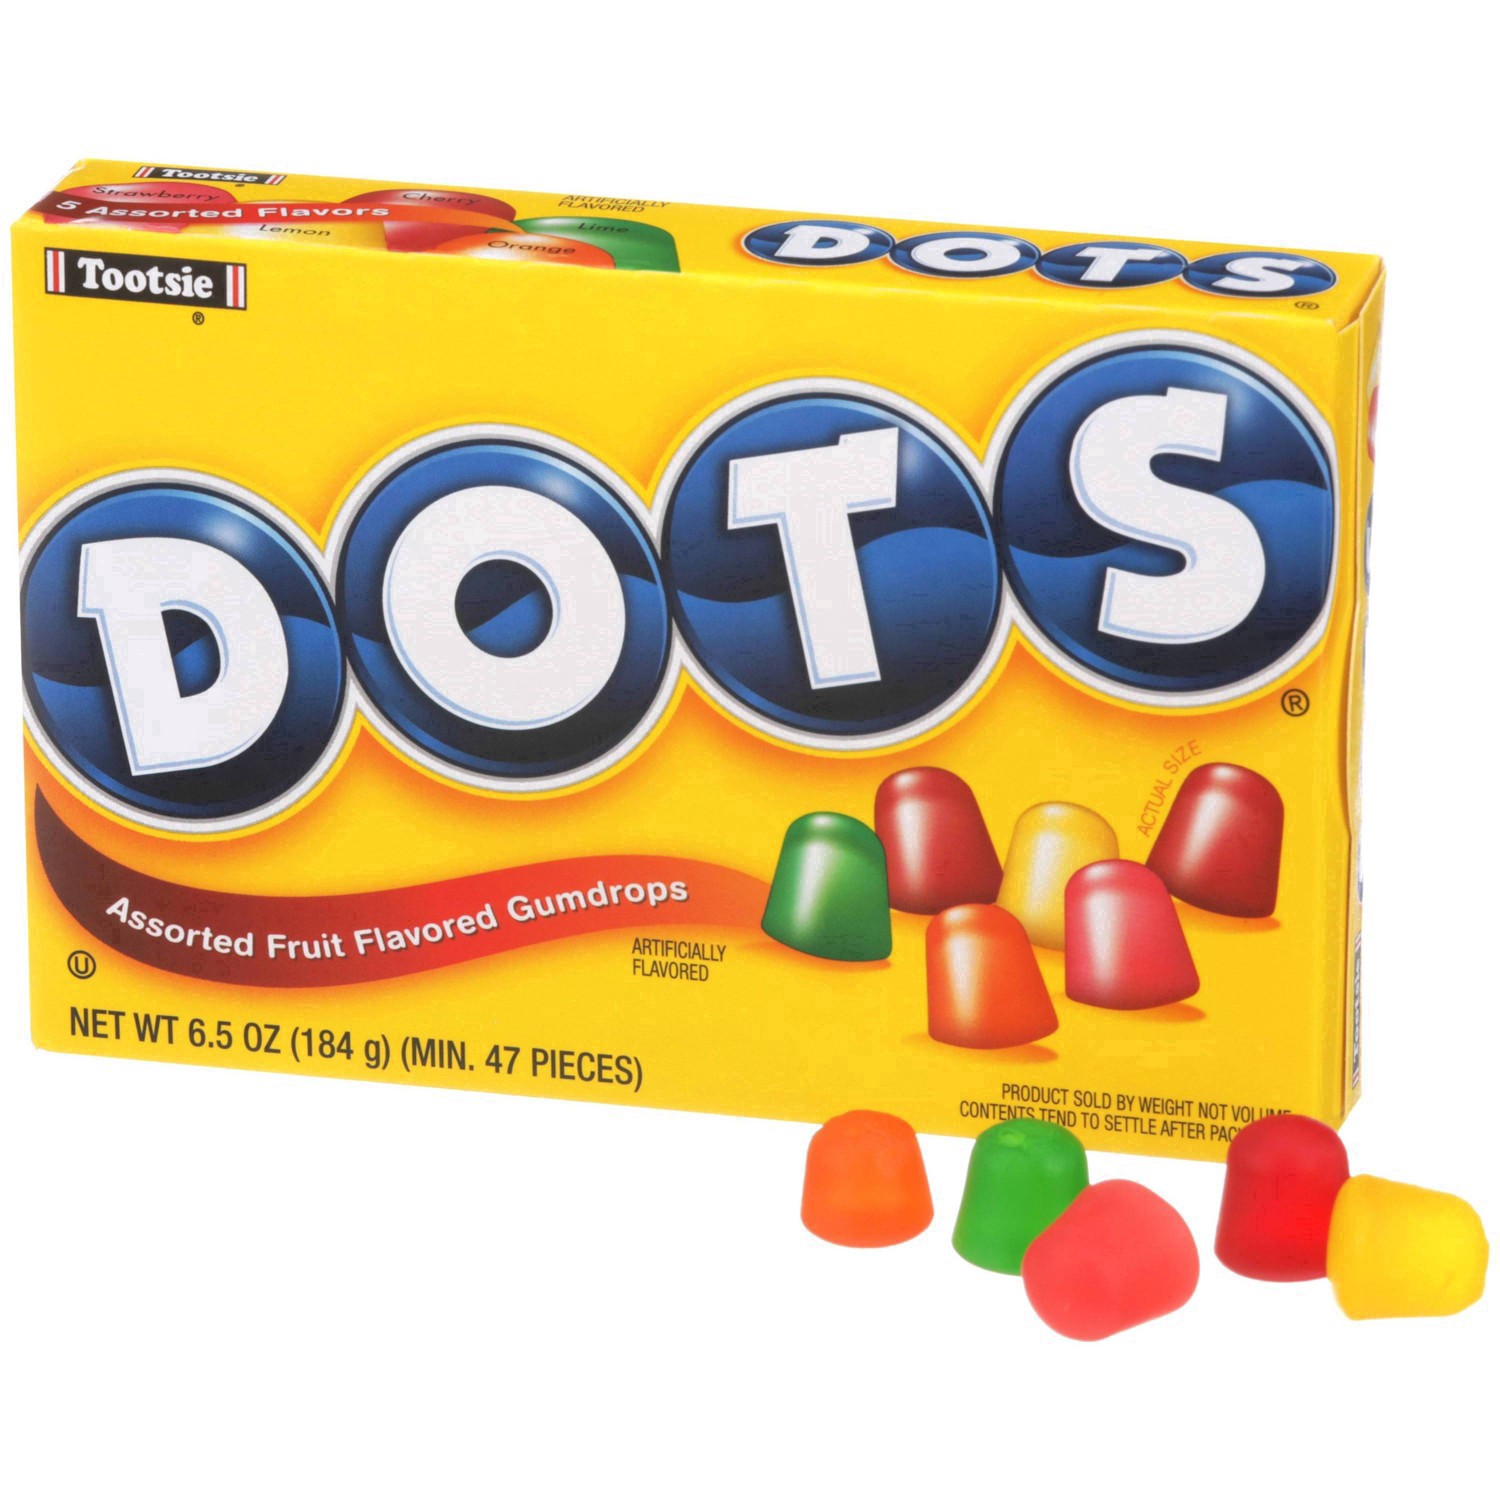 slide 5 of 49, DOTS Tootsie Roll Dots Candy, 6.5 oz